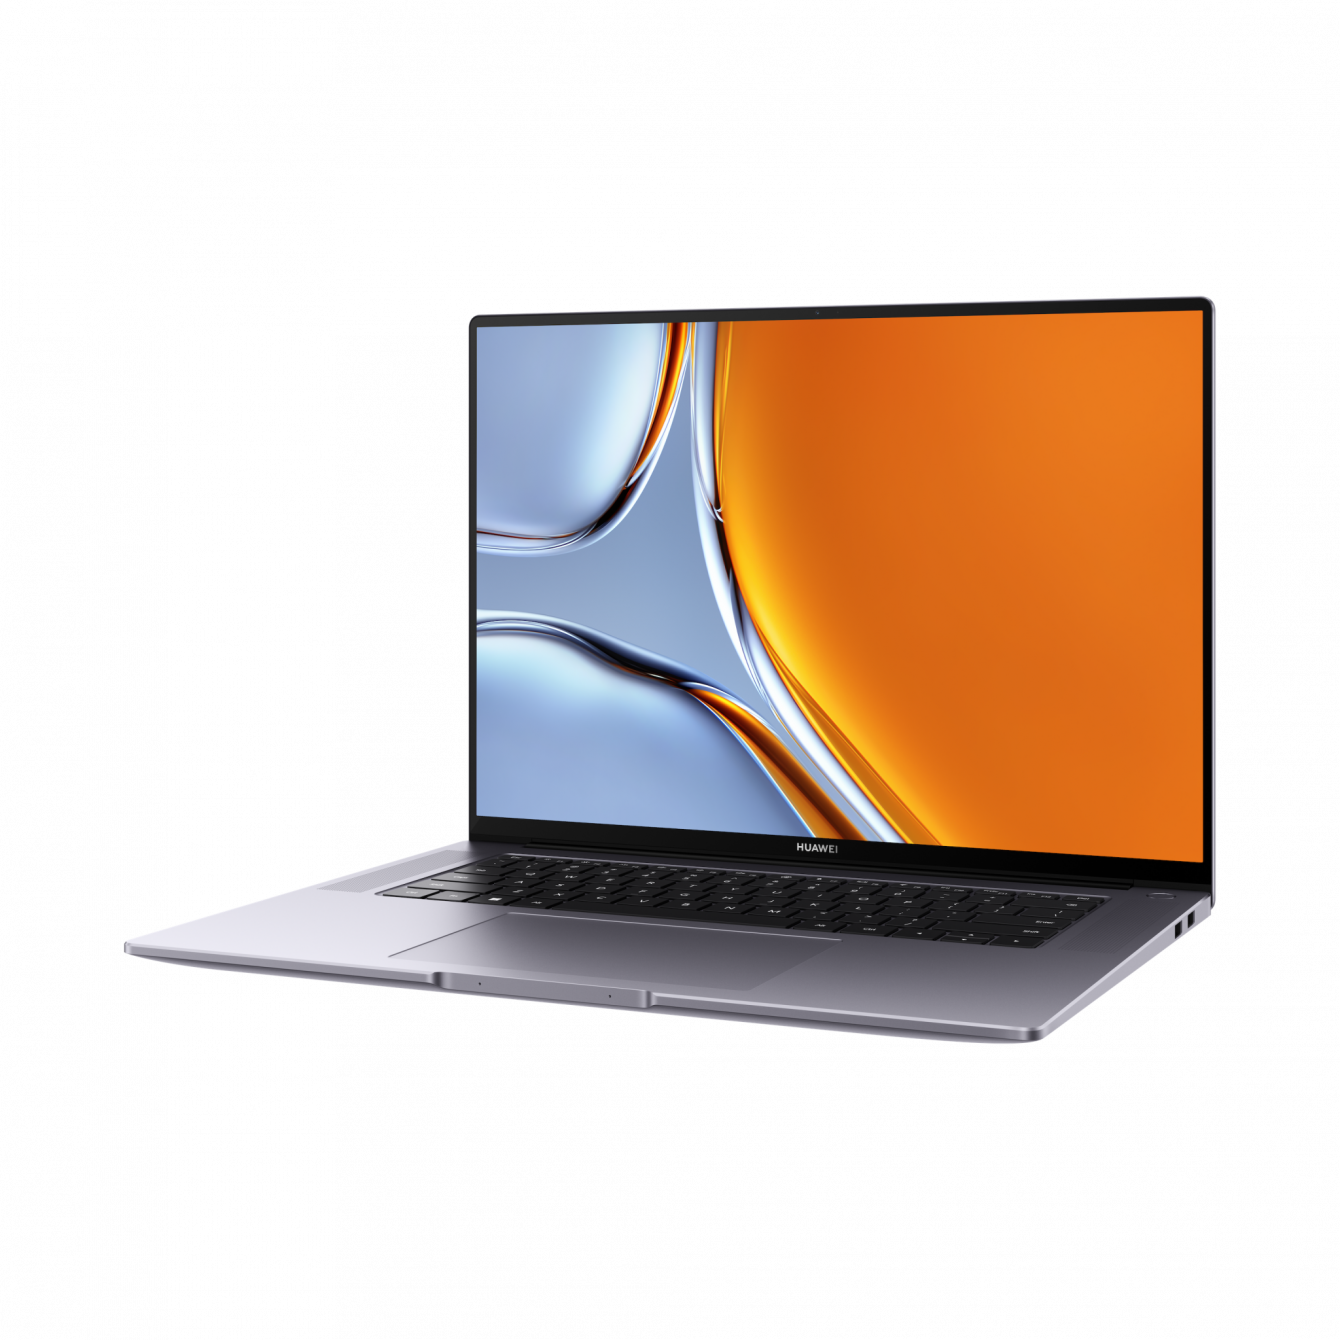 HUAWEI MateBook 16s: the laptop designed for the era of hybrid work